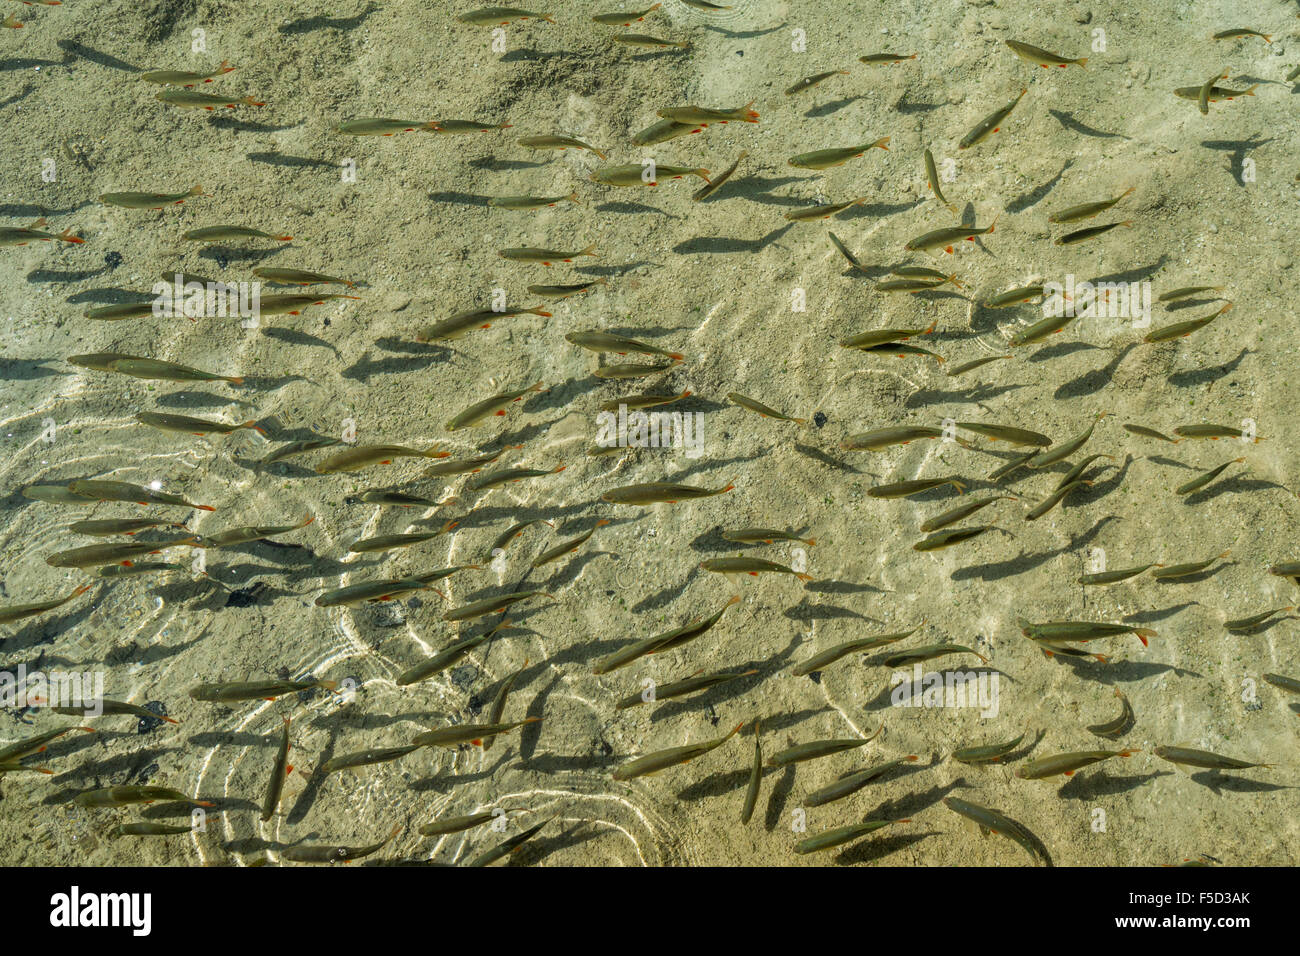 Fish in crystal clear water of a lake at Plitvice National Park in Croatia Stock Photo